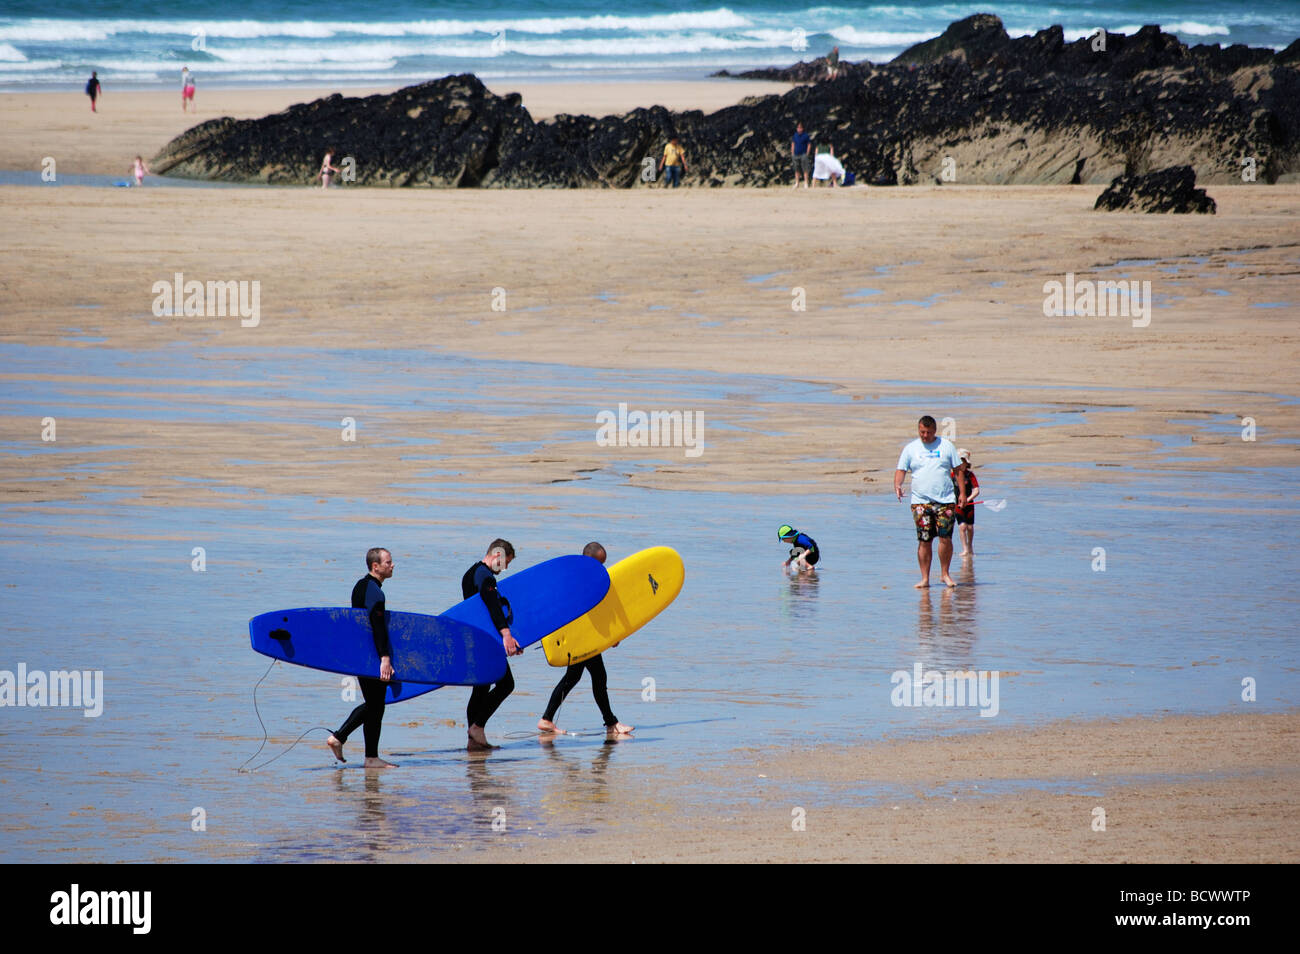 surfers carrying surfboards on fistral beach,cornwall,uk Stock Photo